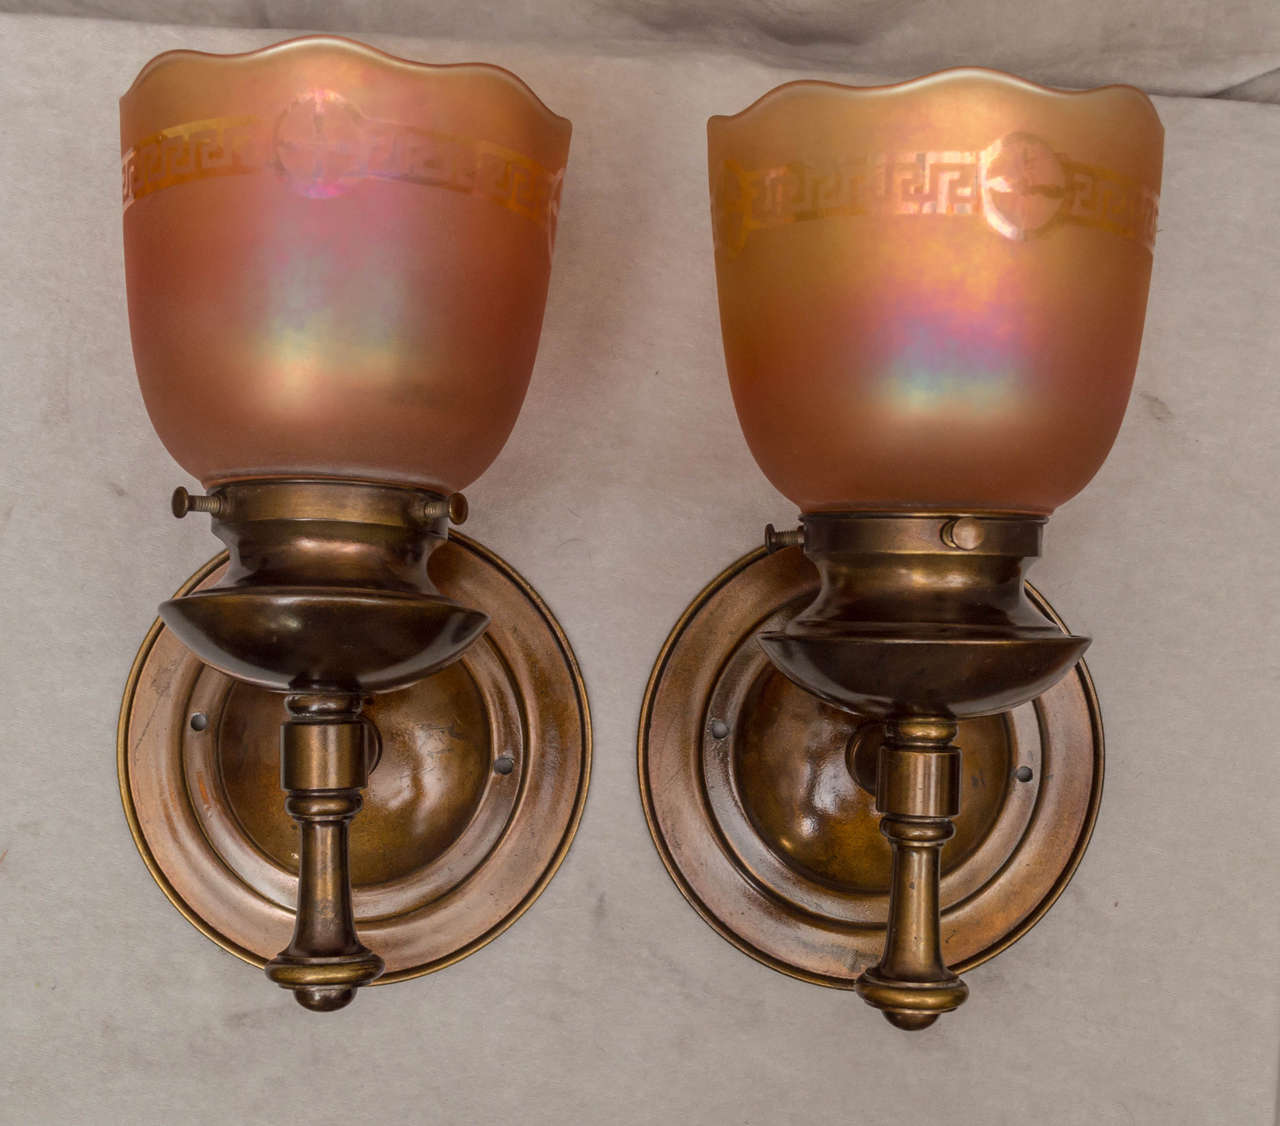 The theme here is, simple and elegant. These handsome sconces are made of brass, and hold up a beautiful pair of signed 